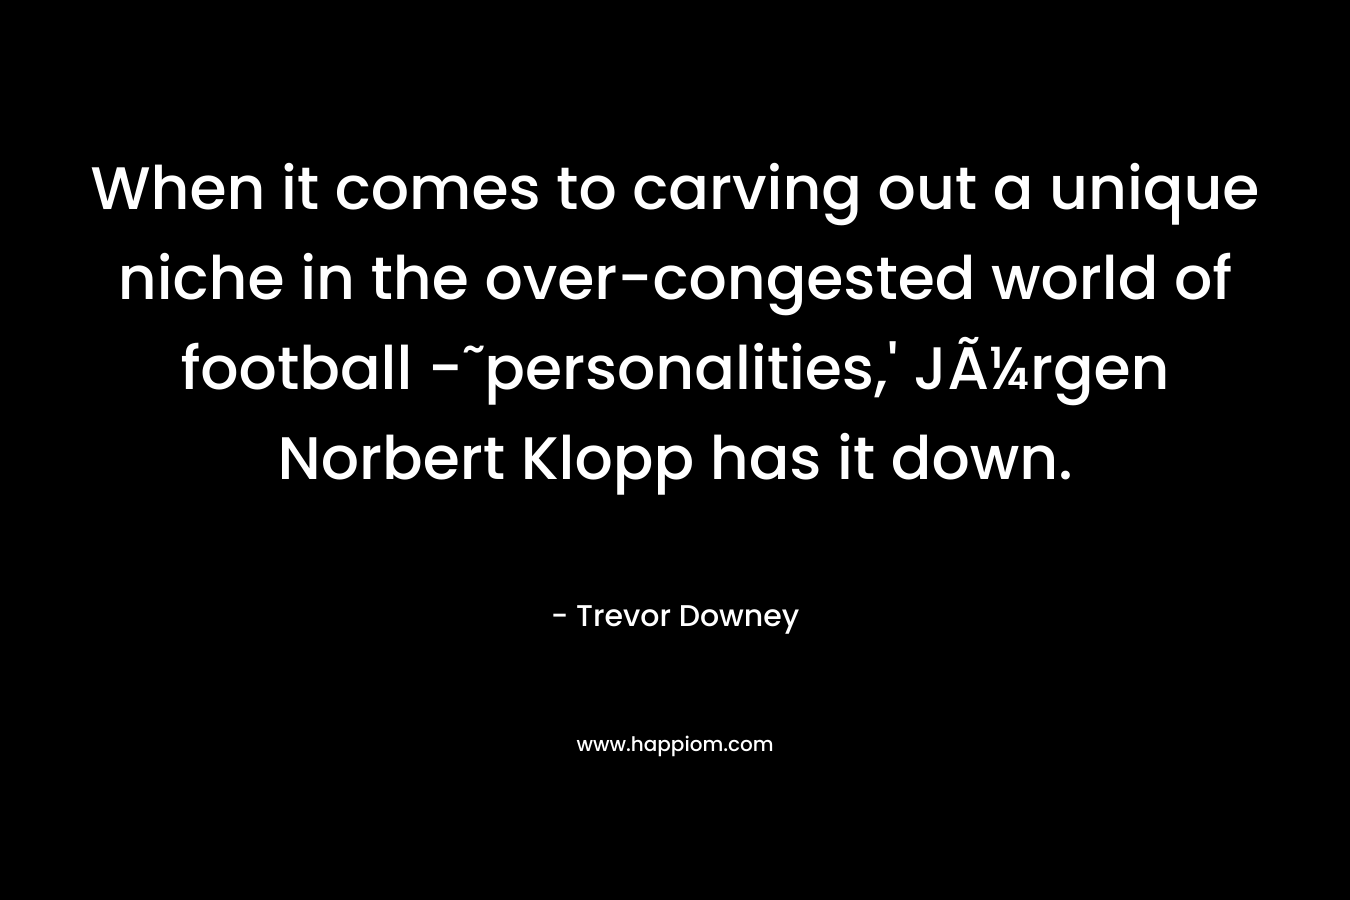 When it comes to carving out a unique niche in the over-congested world of football -˜personalities,' JÃ¼rgen Norbert Klopp has it down.